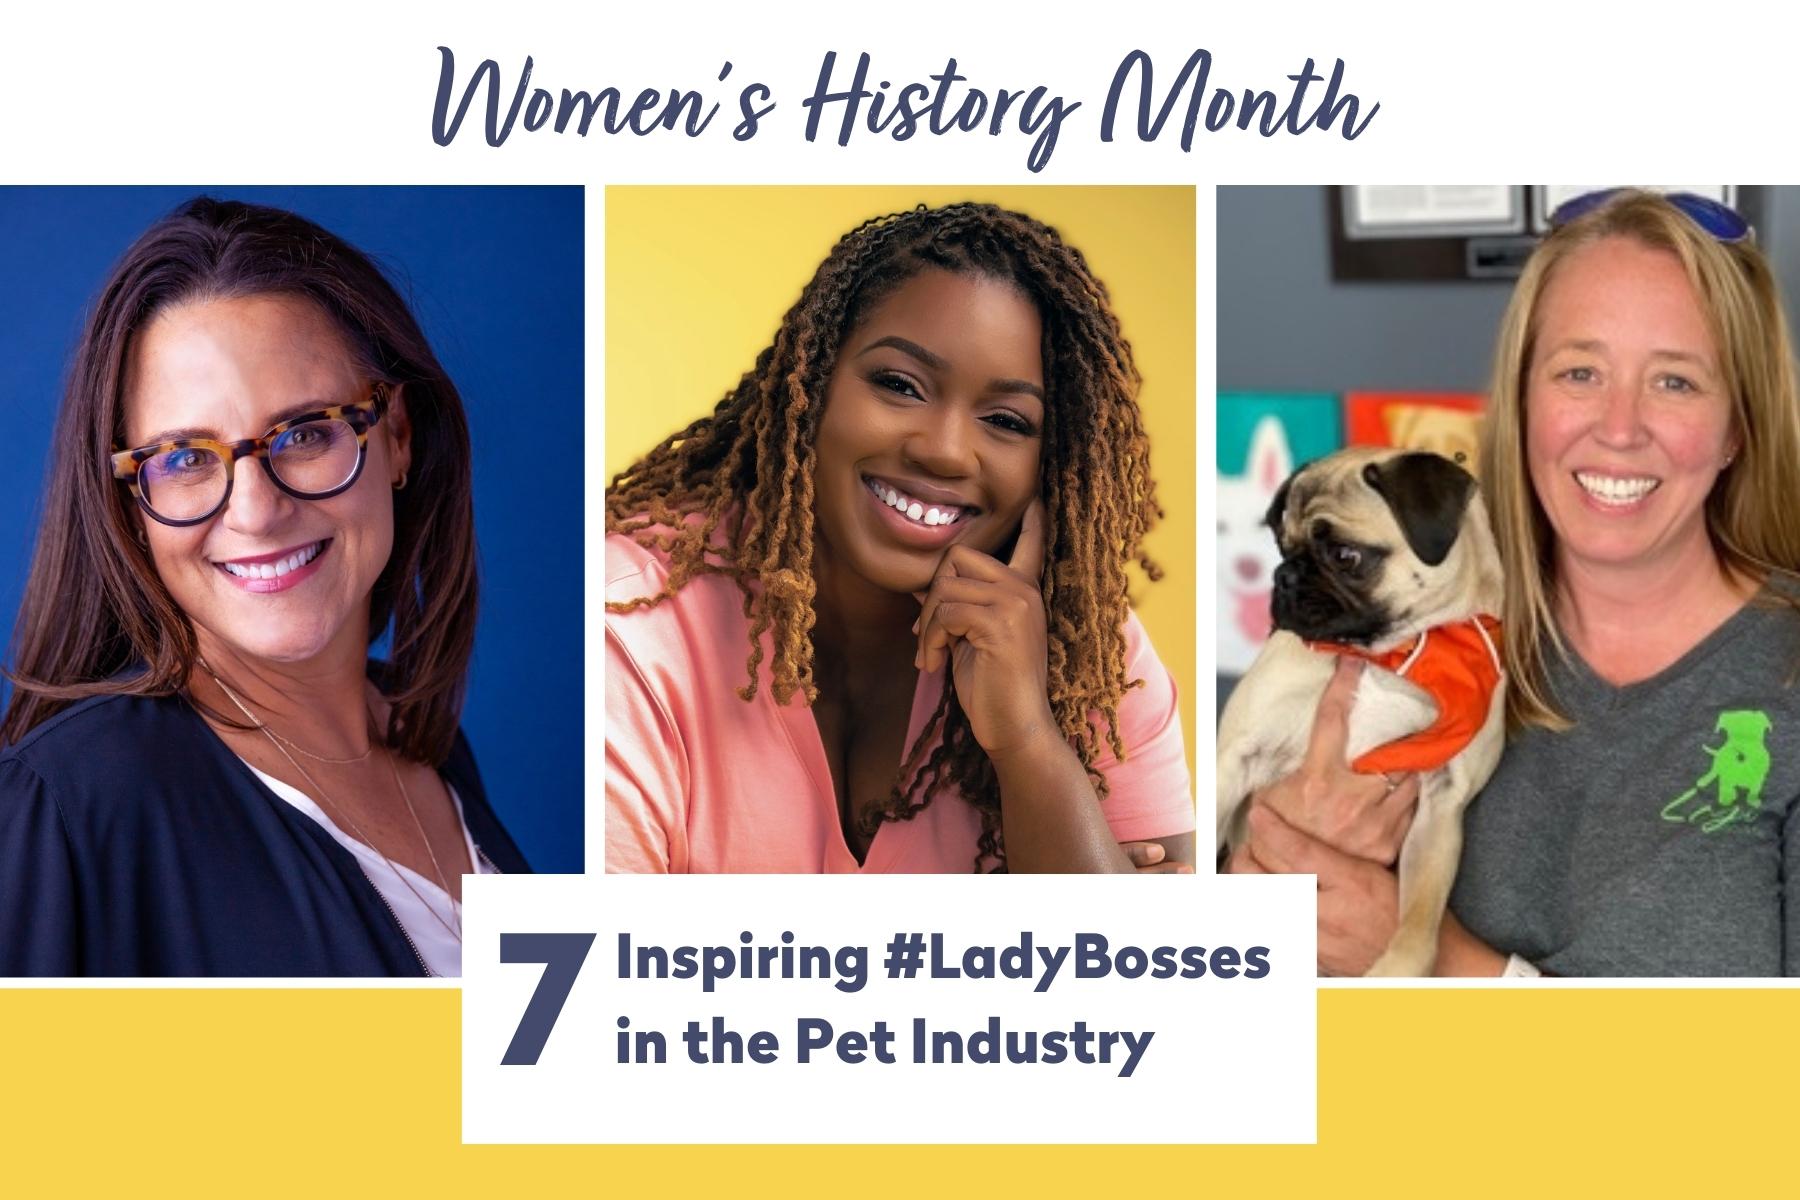 Women’s History Month: 7 Inspiring #LadyBosses In The Pet Industry